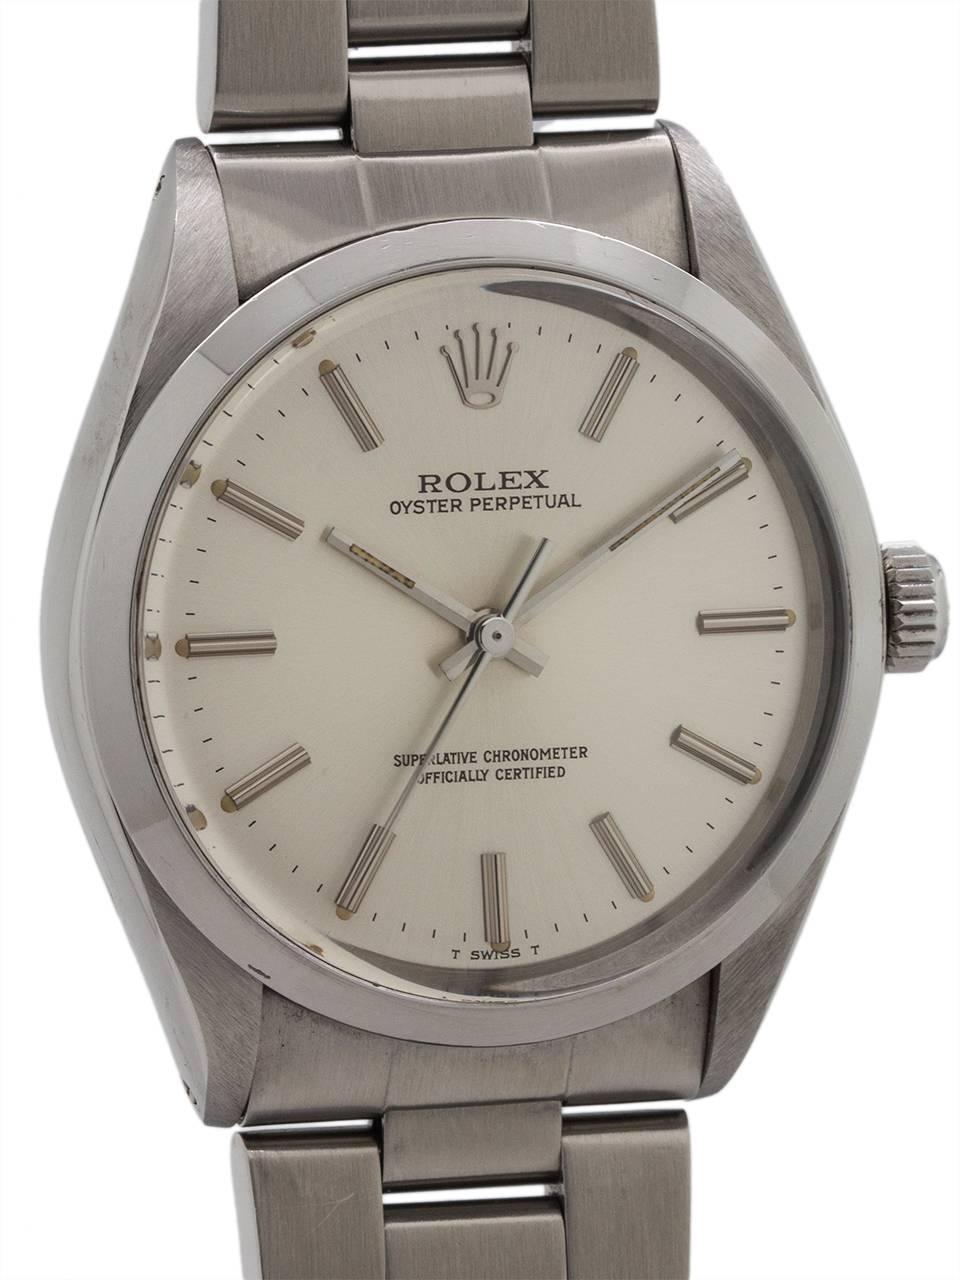 
Rolex Oyster Perpetual ref 1002, serial #8.8 million, circa 1985. Featuring 34mm diameter case with smooth bezel and acrylic crystal. Signed Rolex Oyster screw down crown and case back. Featuring very pleasing original silvered satin dial with